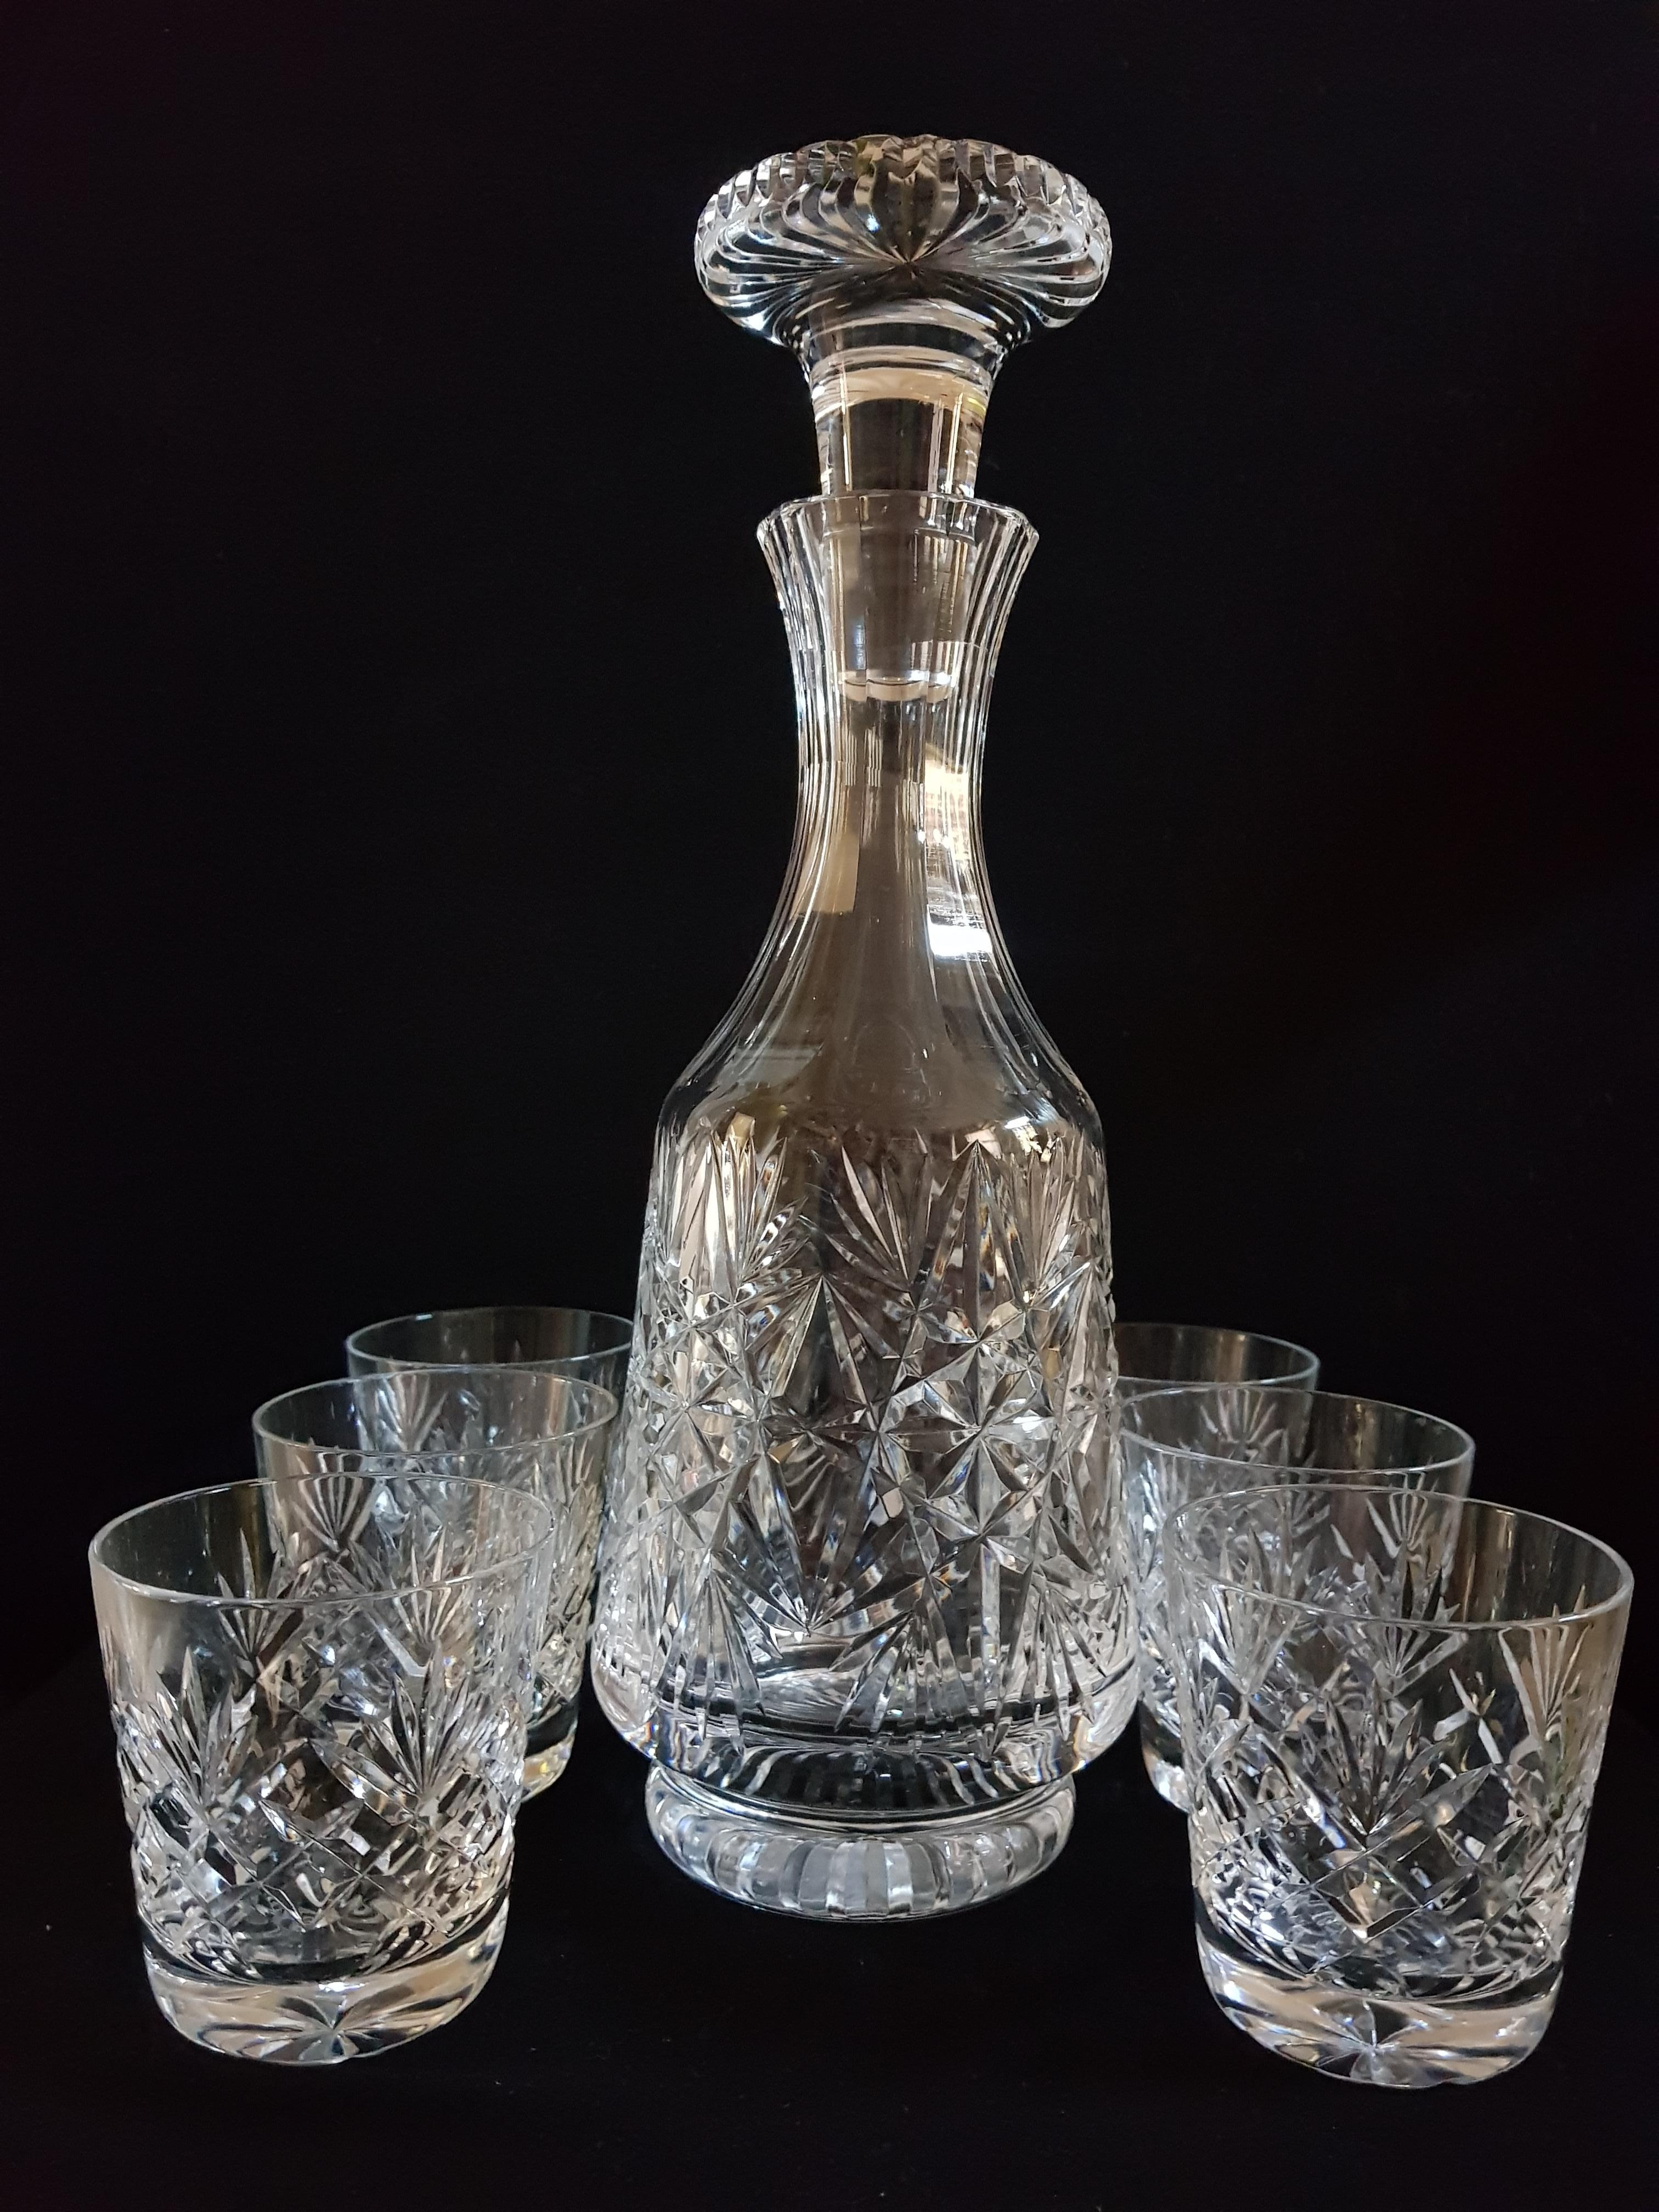 Beautiful vitange Bohemian brilliant hand cut crystal drinking set, decanter with stopper and 6 glasses, brilliant condition. The decanter have 32 cm tall and 12 cm width and glasses have 8 cm tall and 8 cm width.